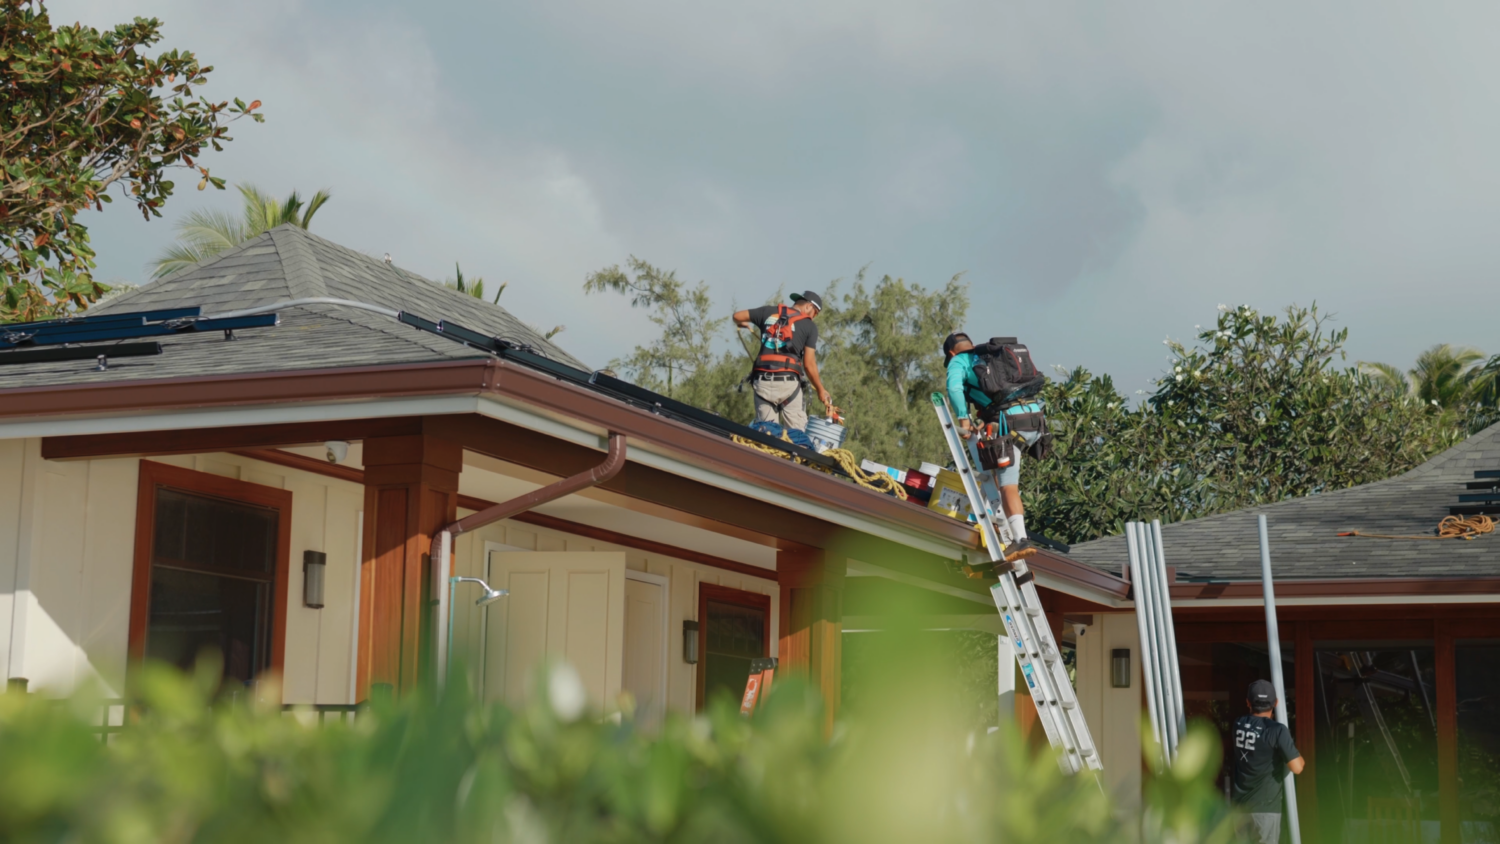 solar panels being installed on a roof in Hawaii